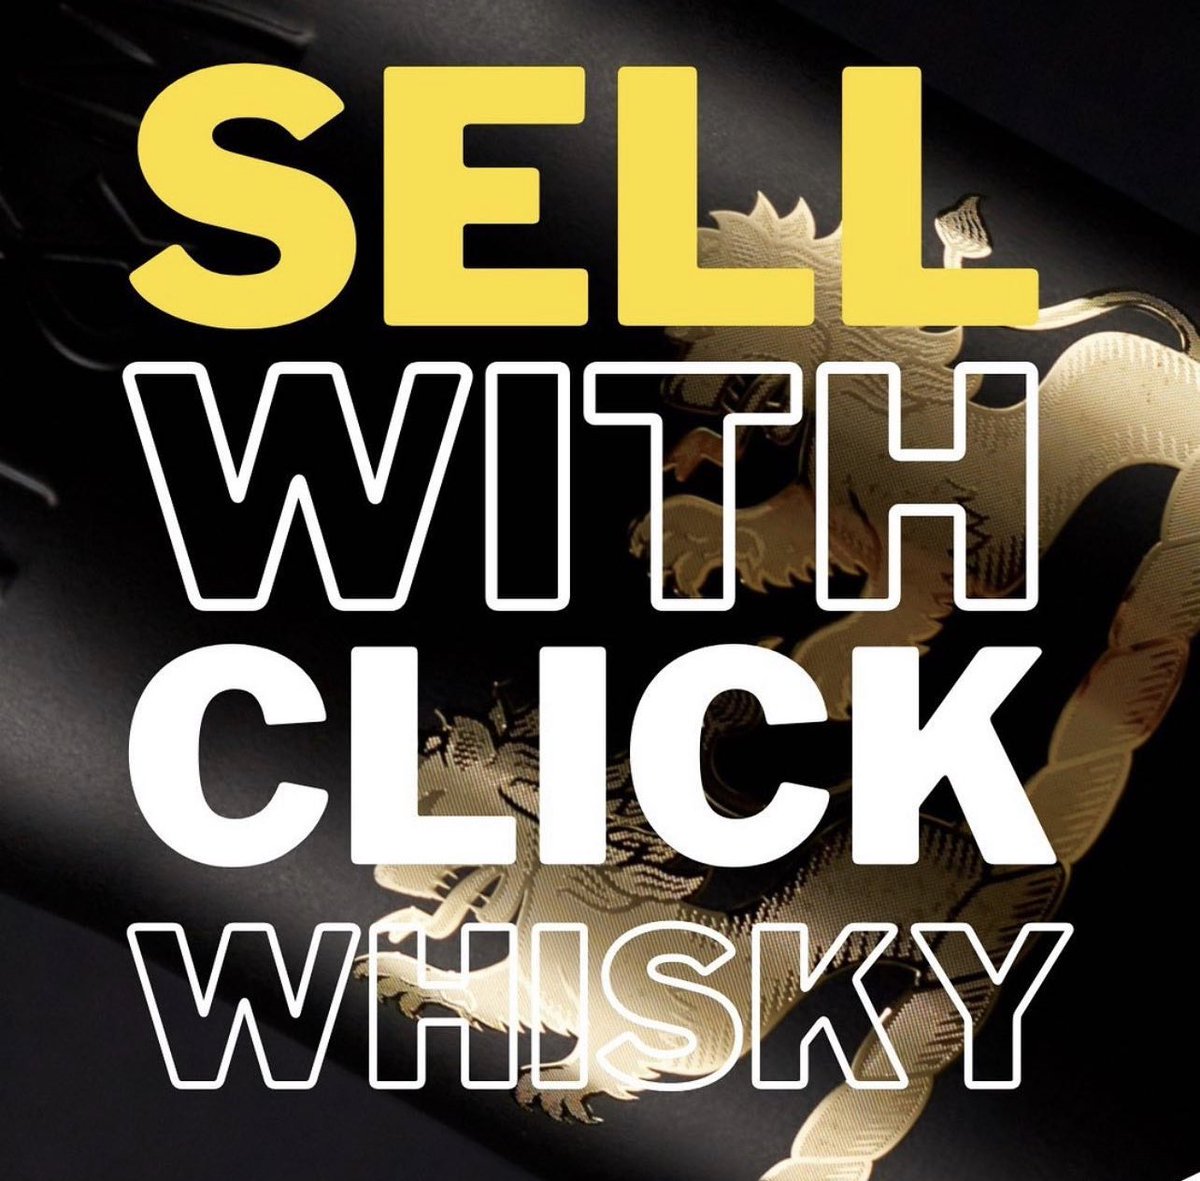 There’s still time to get your whisky to us for our next auction. FREE valuations while you wait. Call, visit or email us by Saturday 8th June #sellwhisky #malt #whisky #clickwhisky #freevaluations #whiskyauction #clickwhiskyauctions